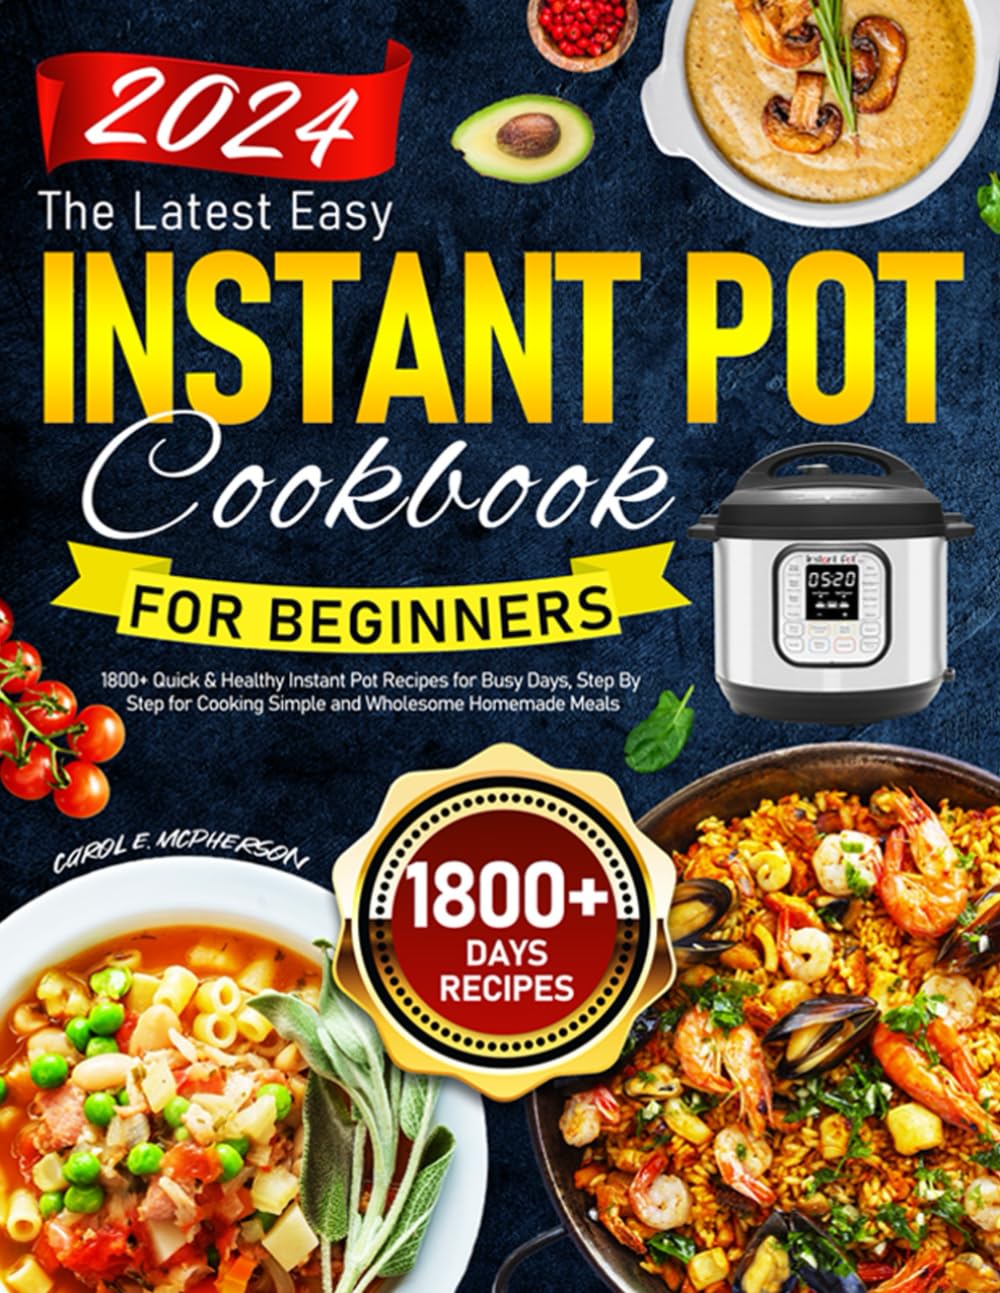 The Latest Easy Instant Pot Cookbook for Beginners: 1800+ Quick & Healthy Instant Pot Recipes for Busy Days, Step By Step for Cooking Simple and Wholesome Homemade Meals